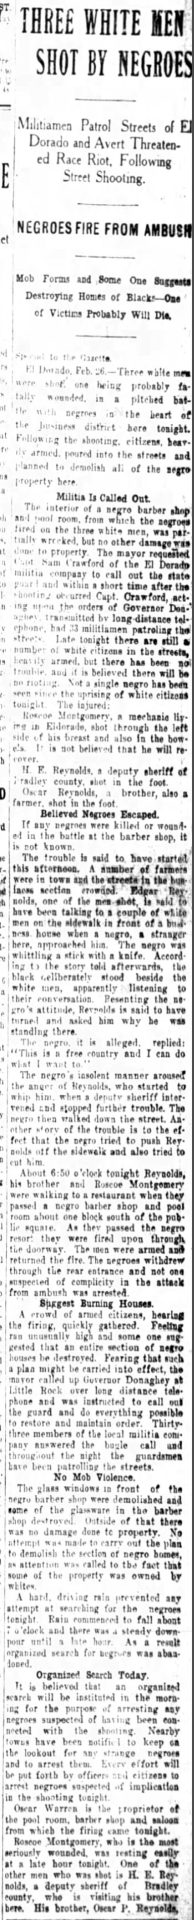 "Three white men shot by Negroes" newspaper clipping